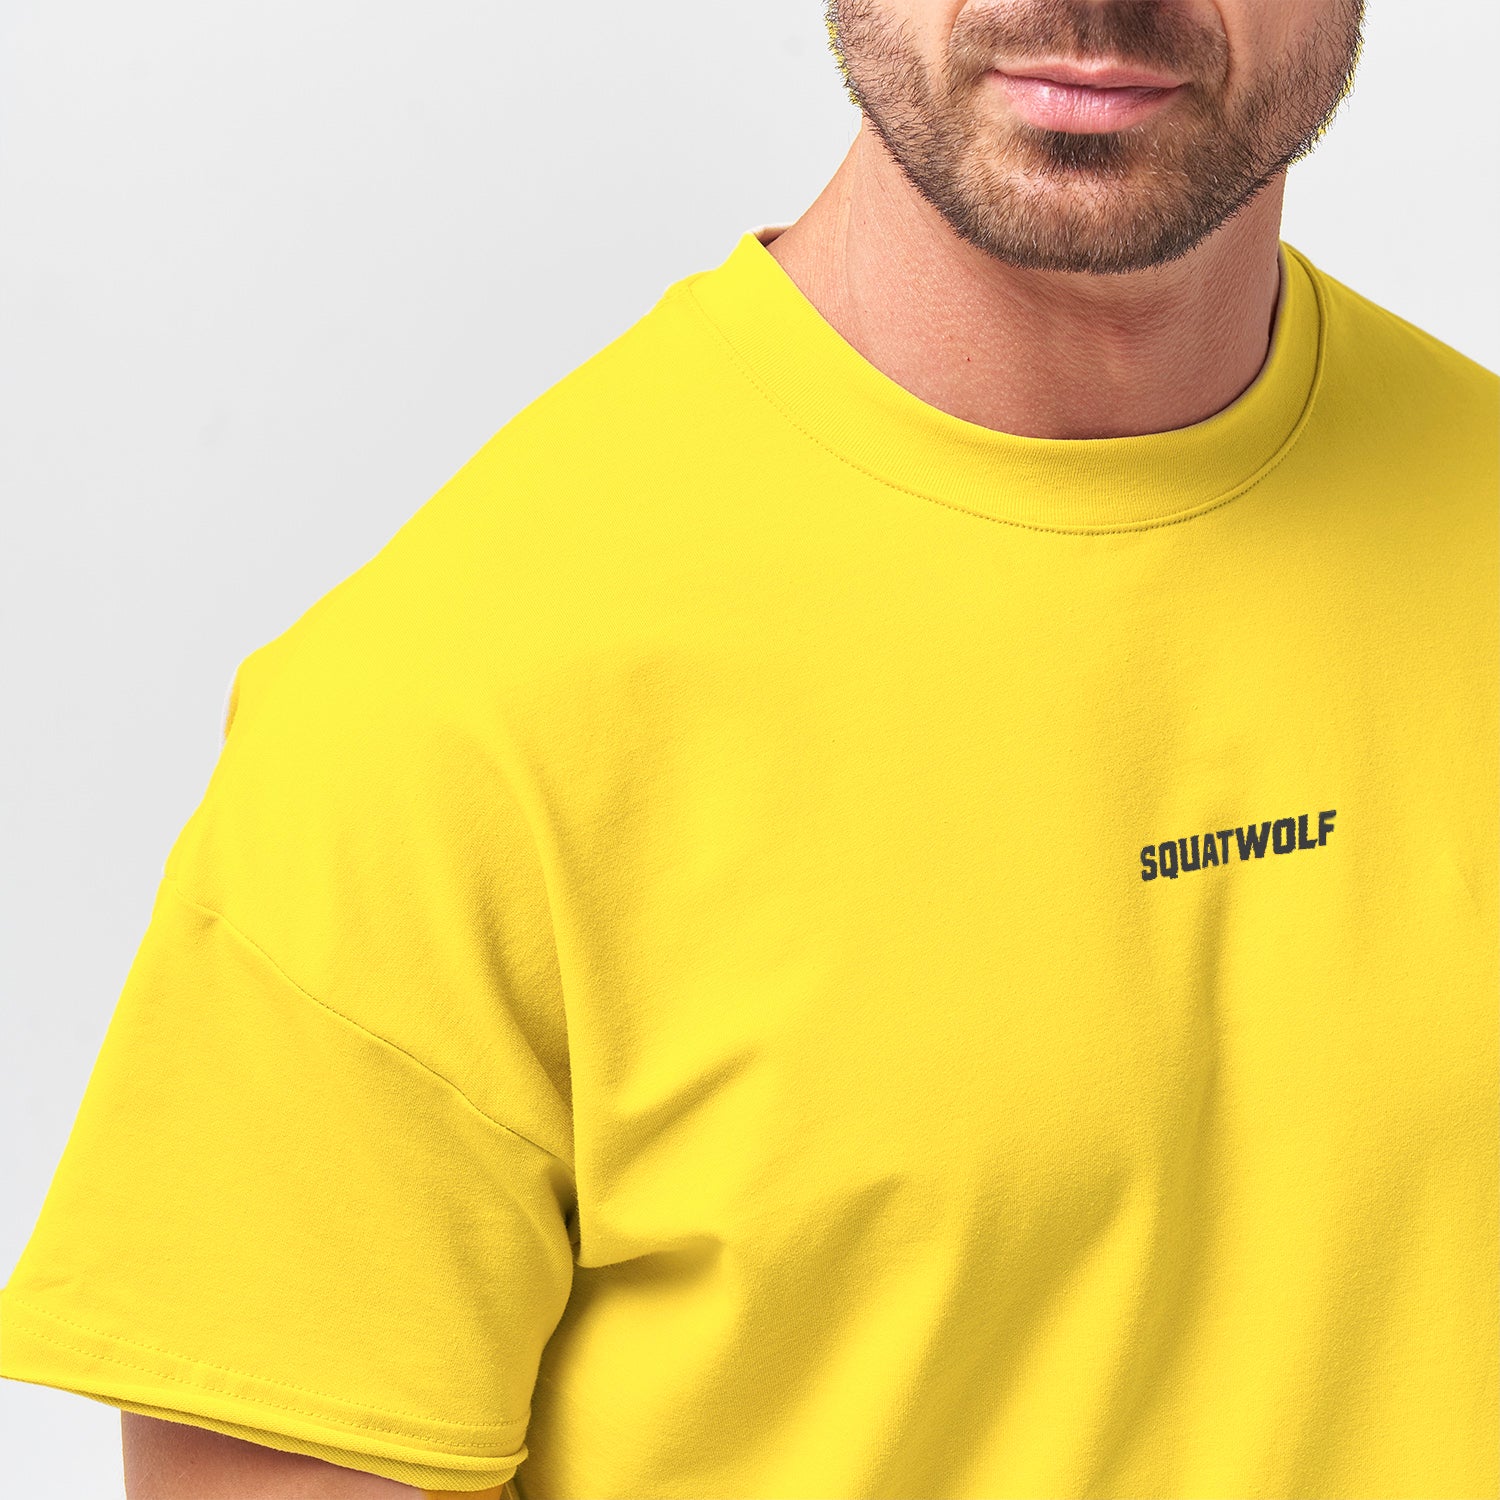 squatwolf-gym-wear-bodybuilding-tee-corn-yellow-workout-shirts-for-men